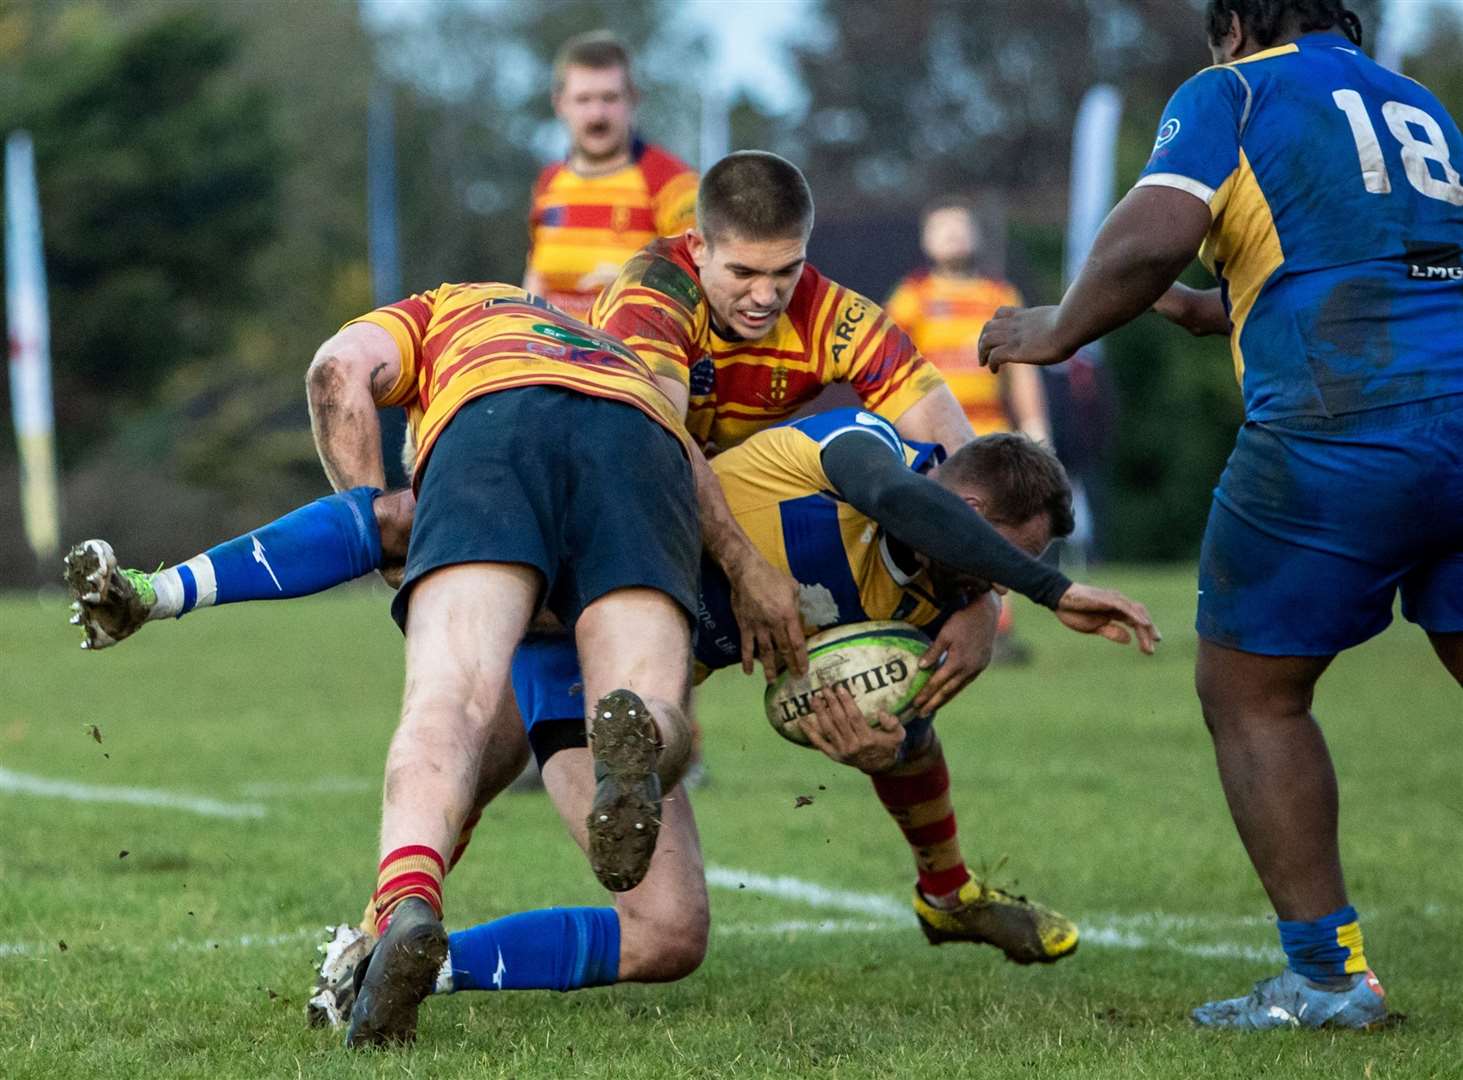 Medway's Ben Dance at the heart of the action against Beckenham. Picture: Jake Miles Sports Photography